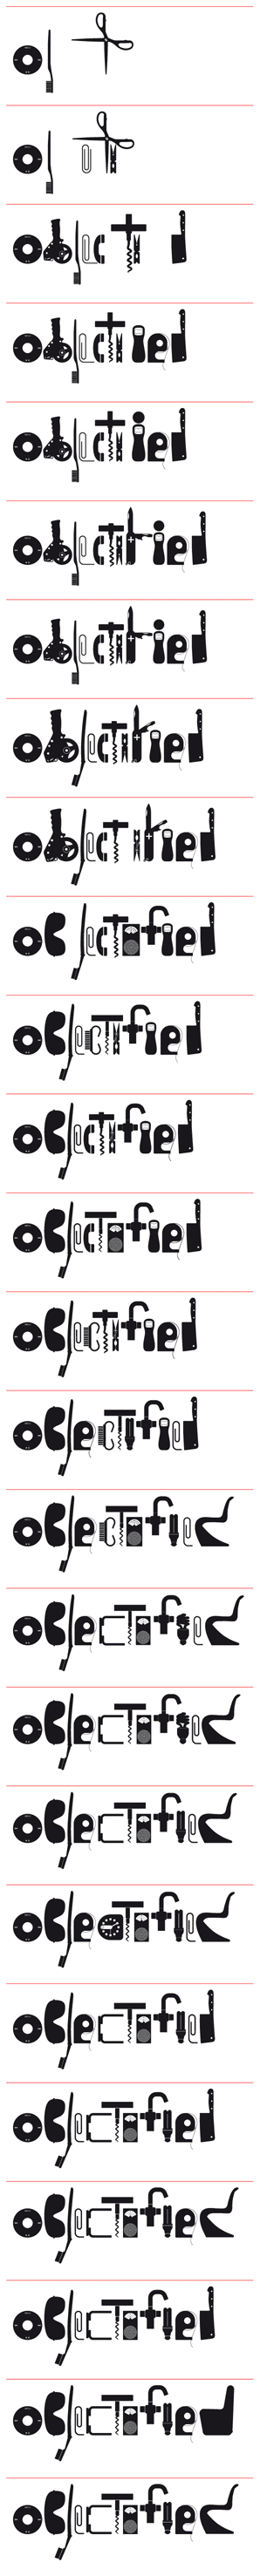 objectified-revisions-of-the-logo